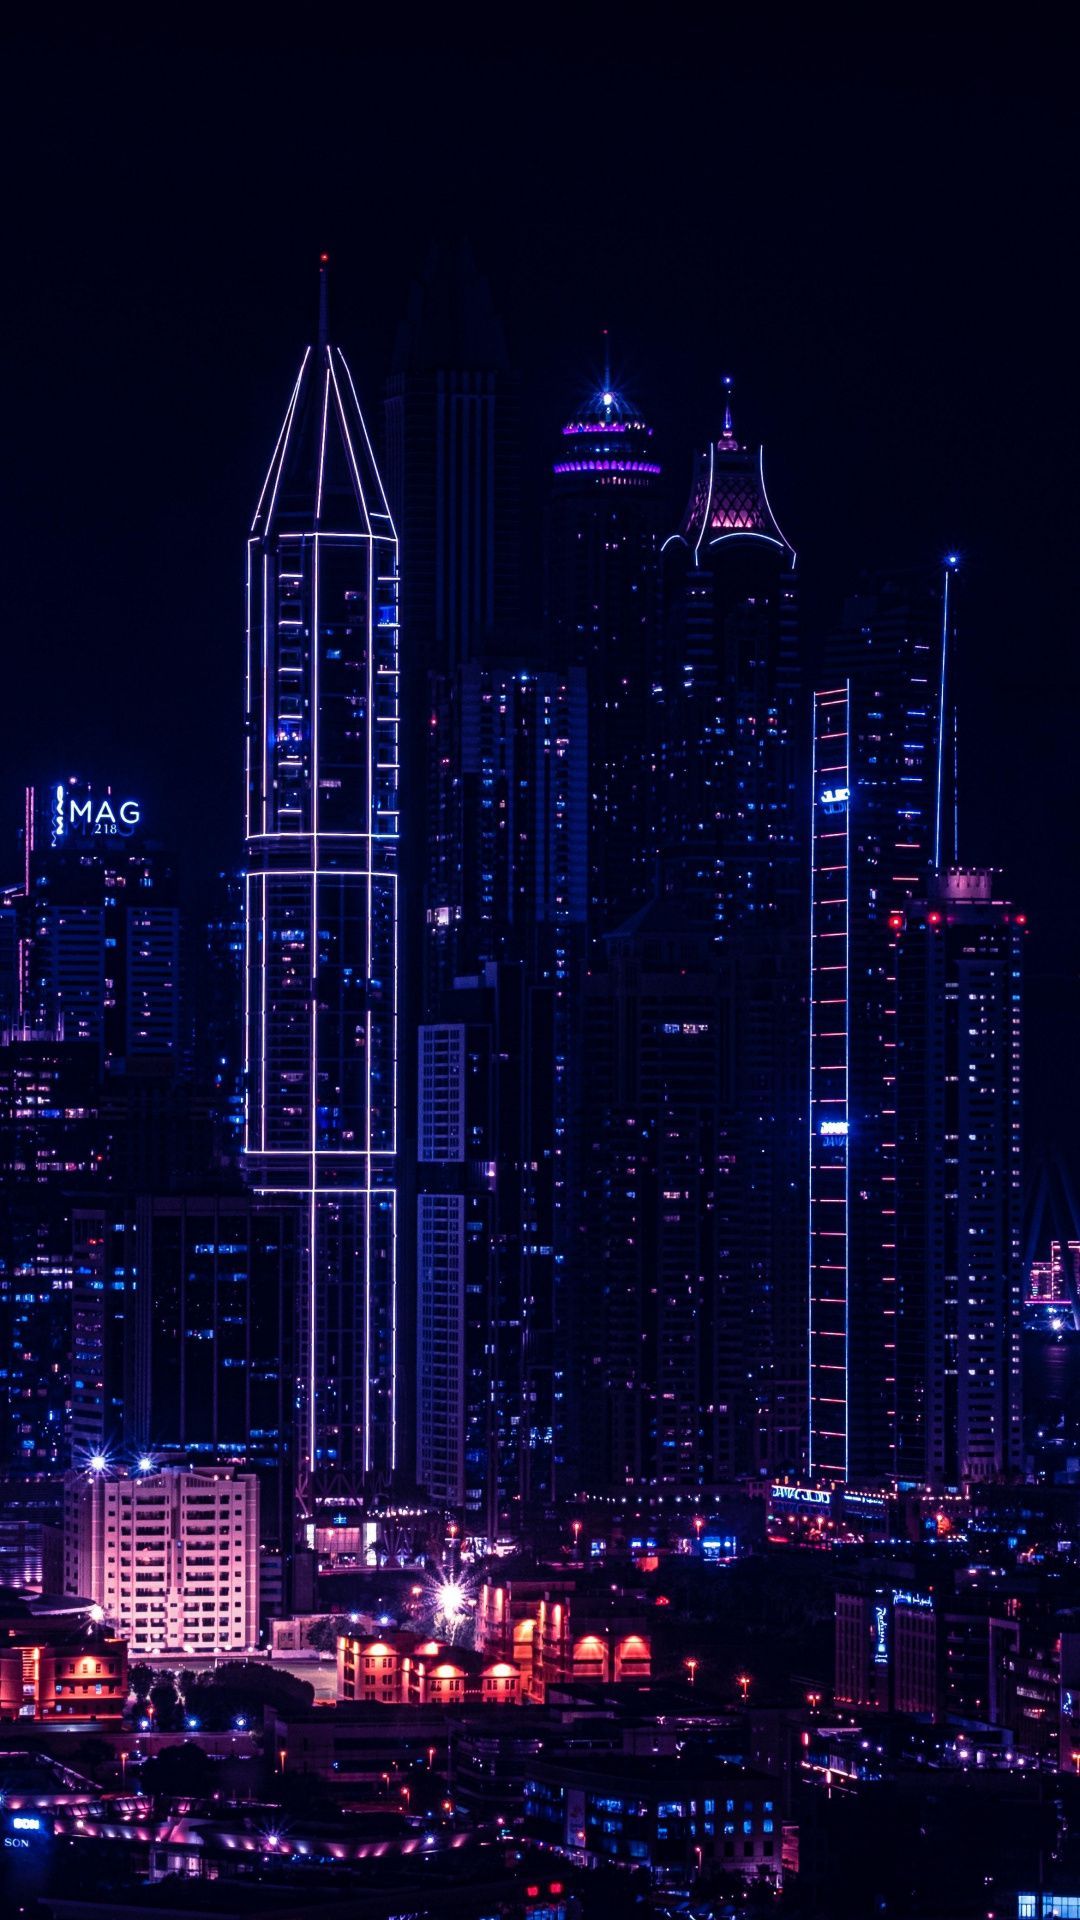 City, night, lights of buildings, cityscape wallpaper. Cityscape wallpaper, City wallpaper, Neon wallpaper